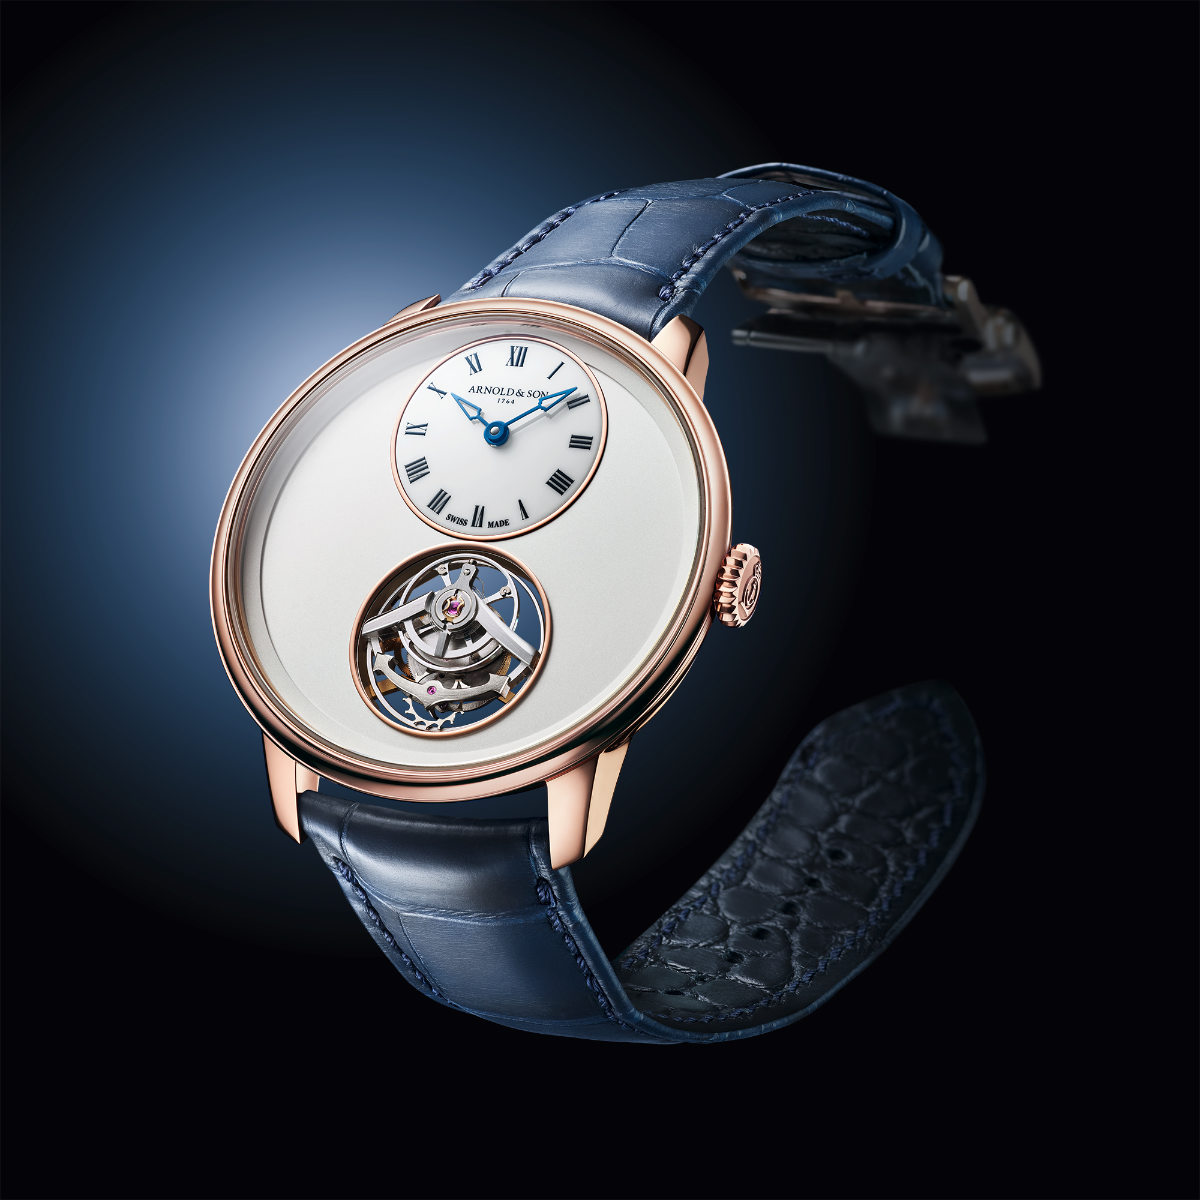 Arnold & Son Presents Its New Ultrathin Tourbillon Gold Watch - The Finesse Of Gold And Silver